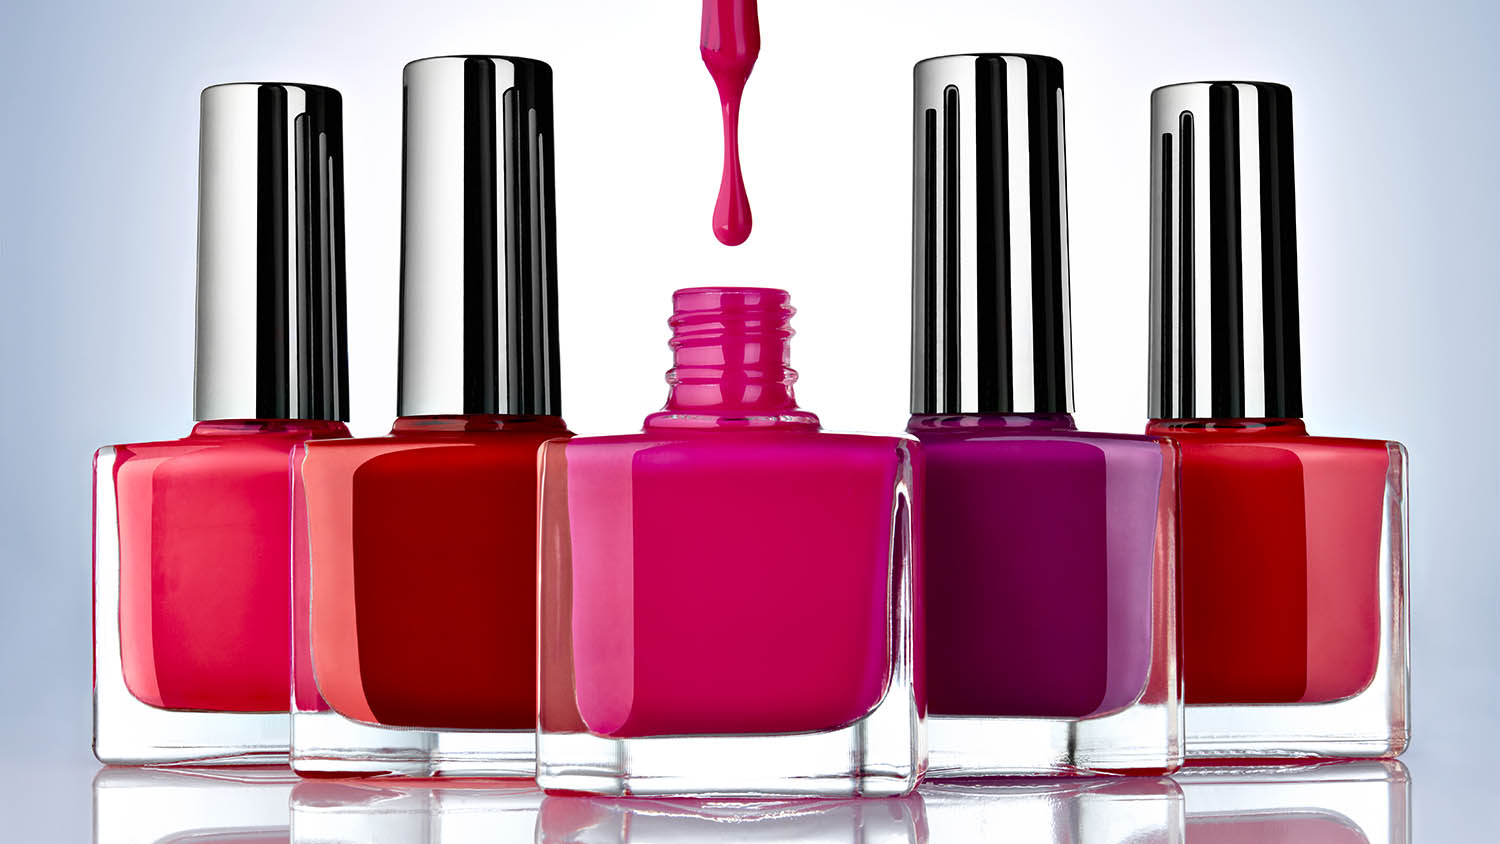 3. Selling high-quality nail polish in trendy street colors - wide 7